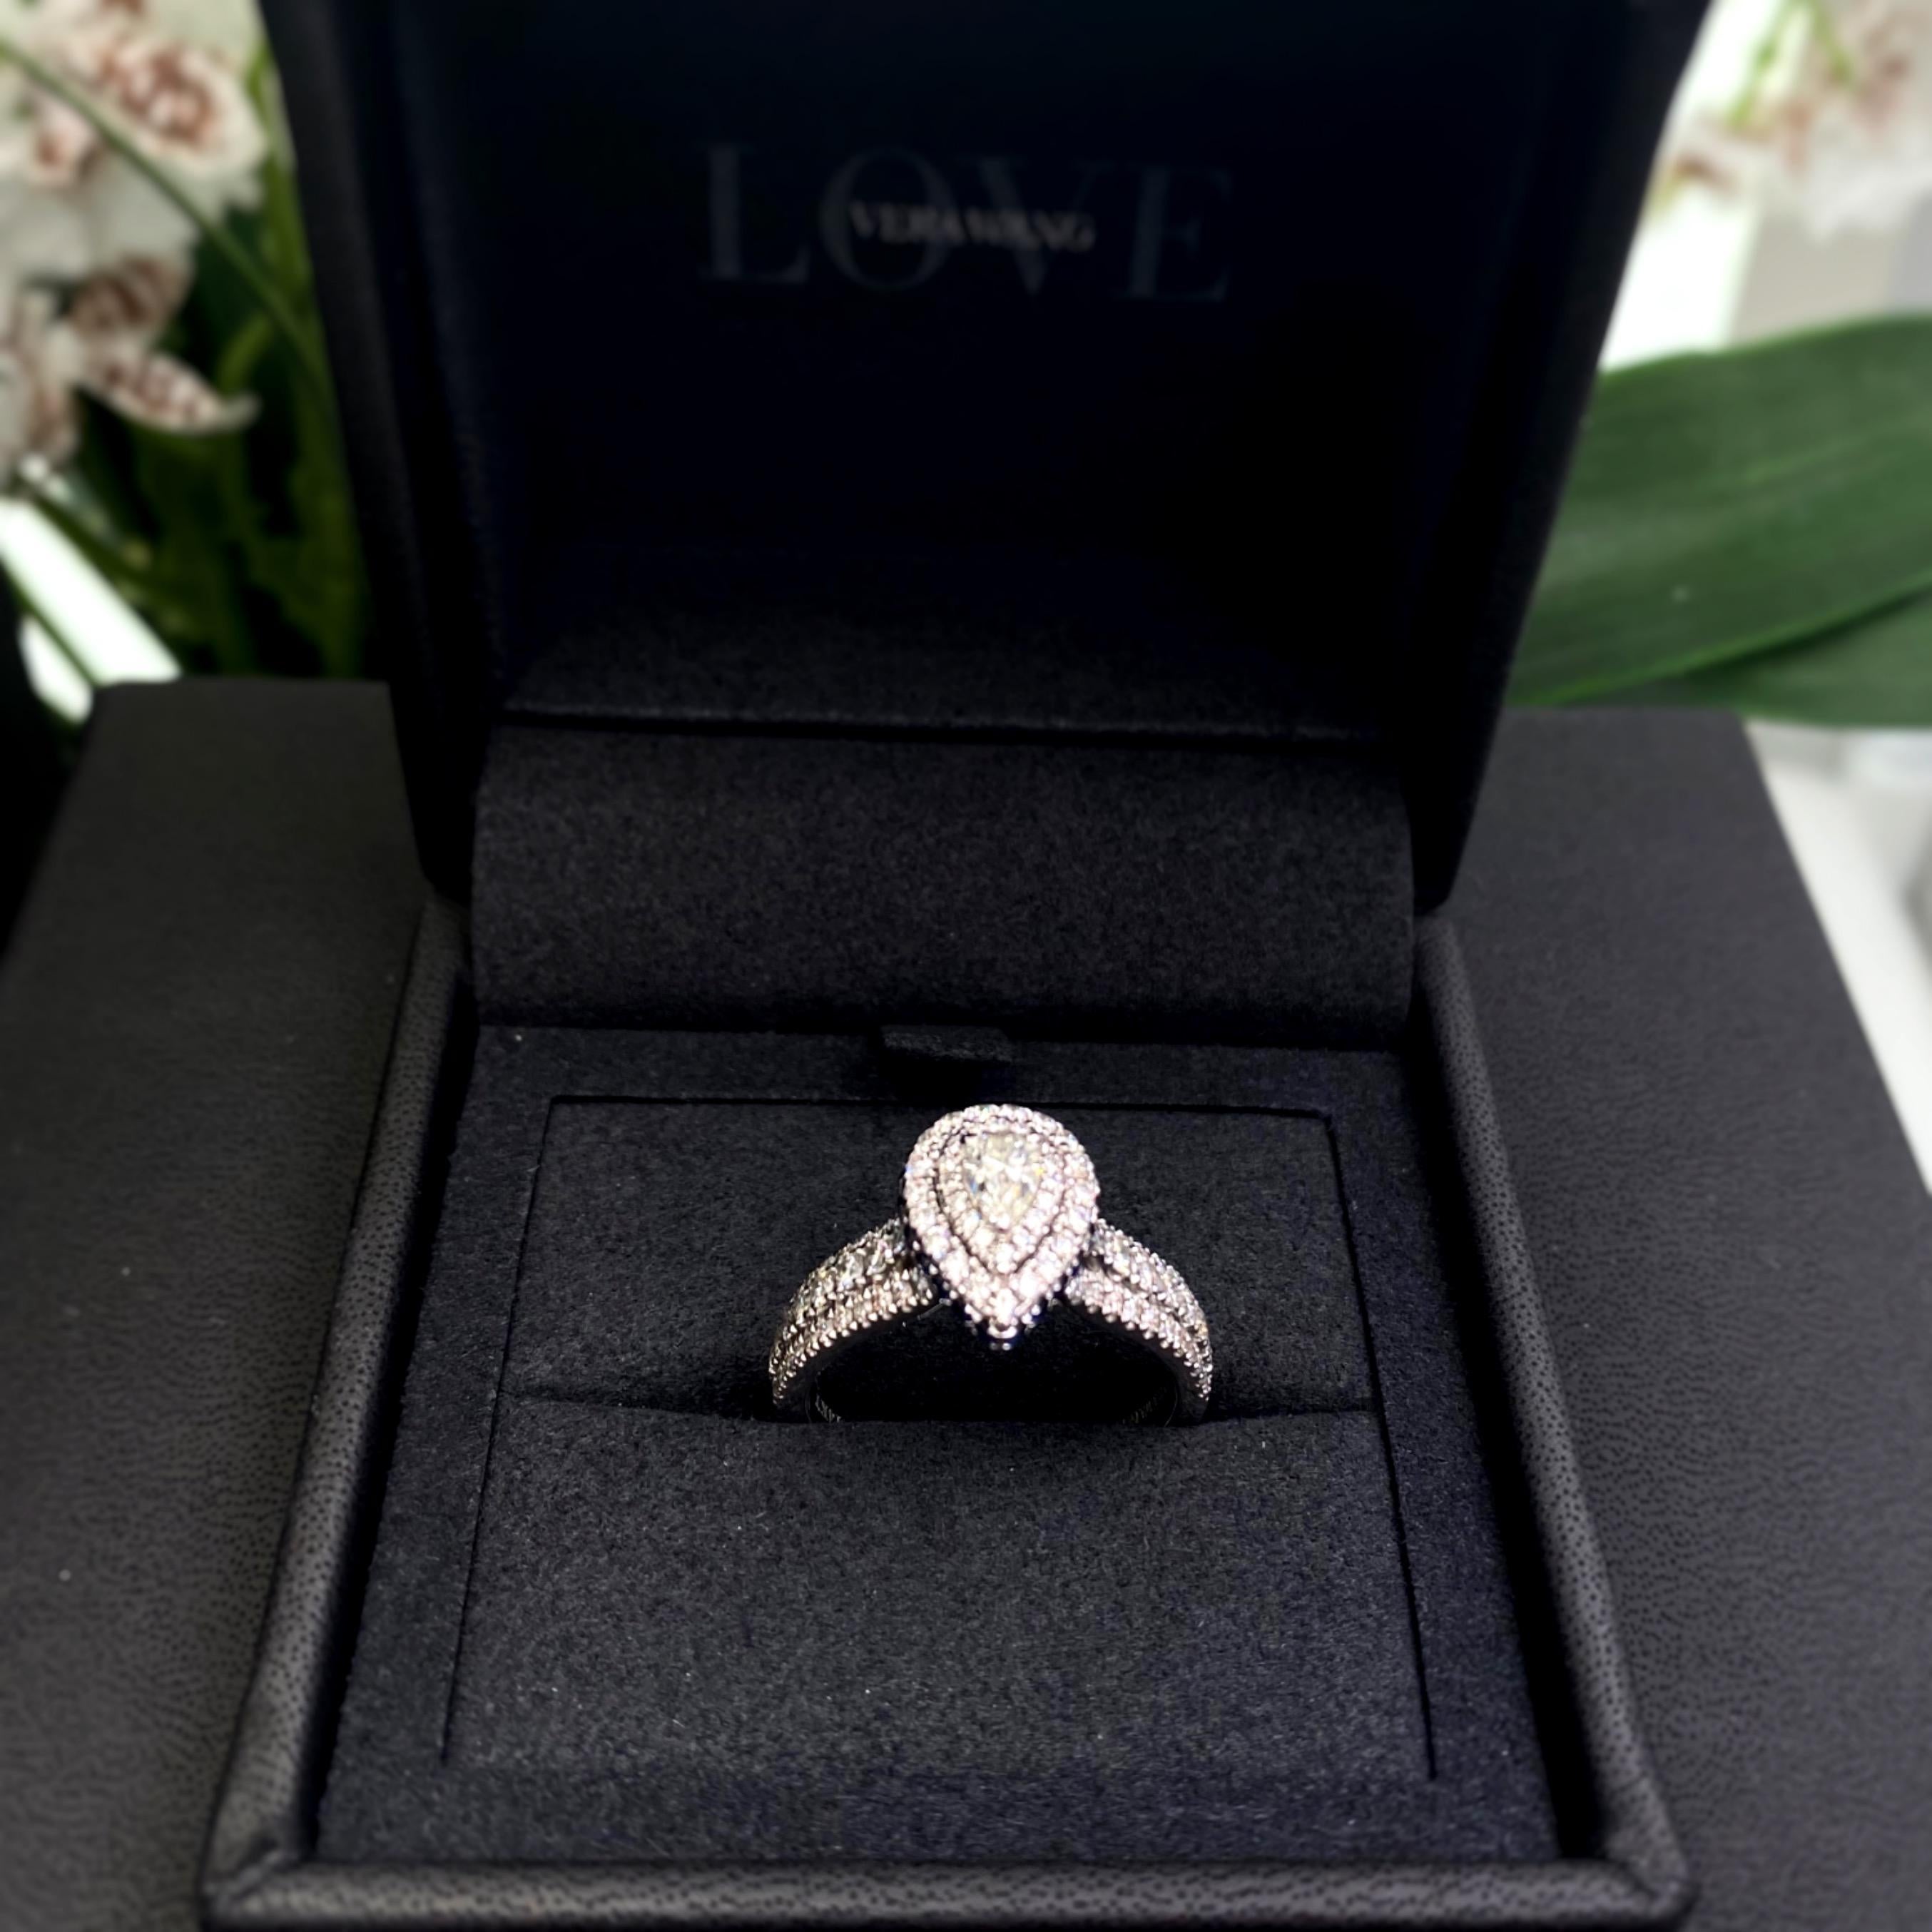 Details about   Vera Wang Love Collection 2.5 CT Pear Cut Diamond Engagement Ring Sapphire Bride 